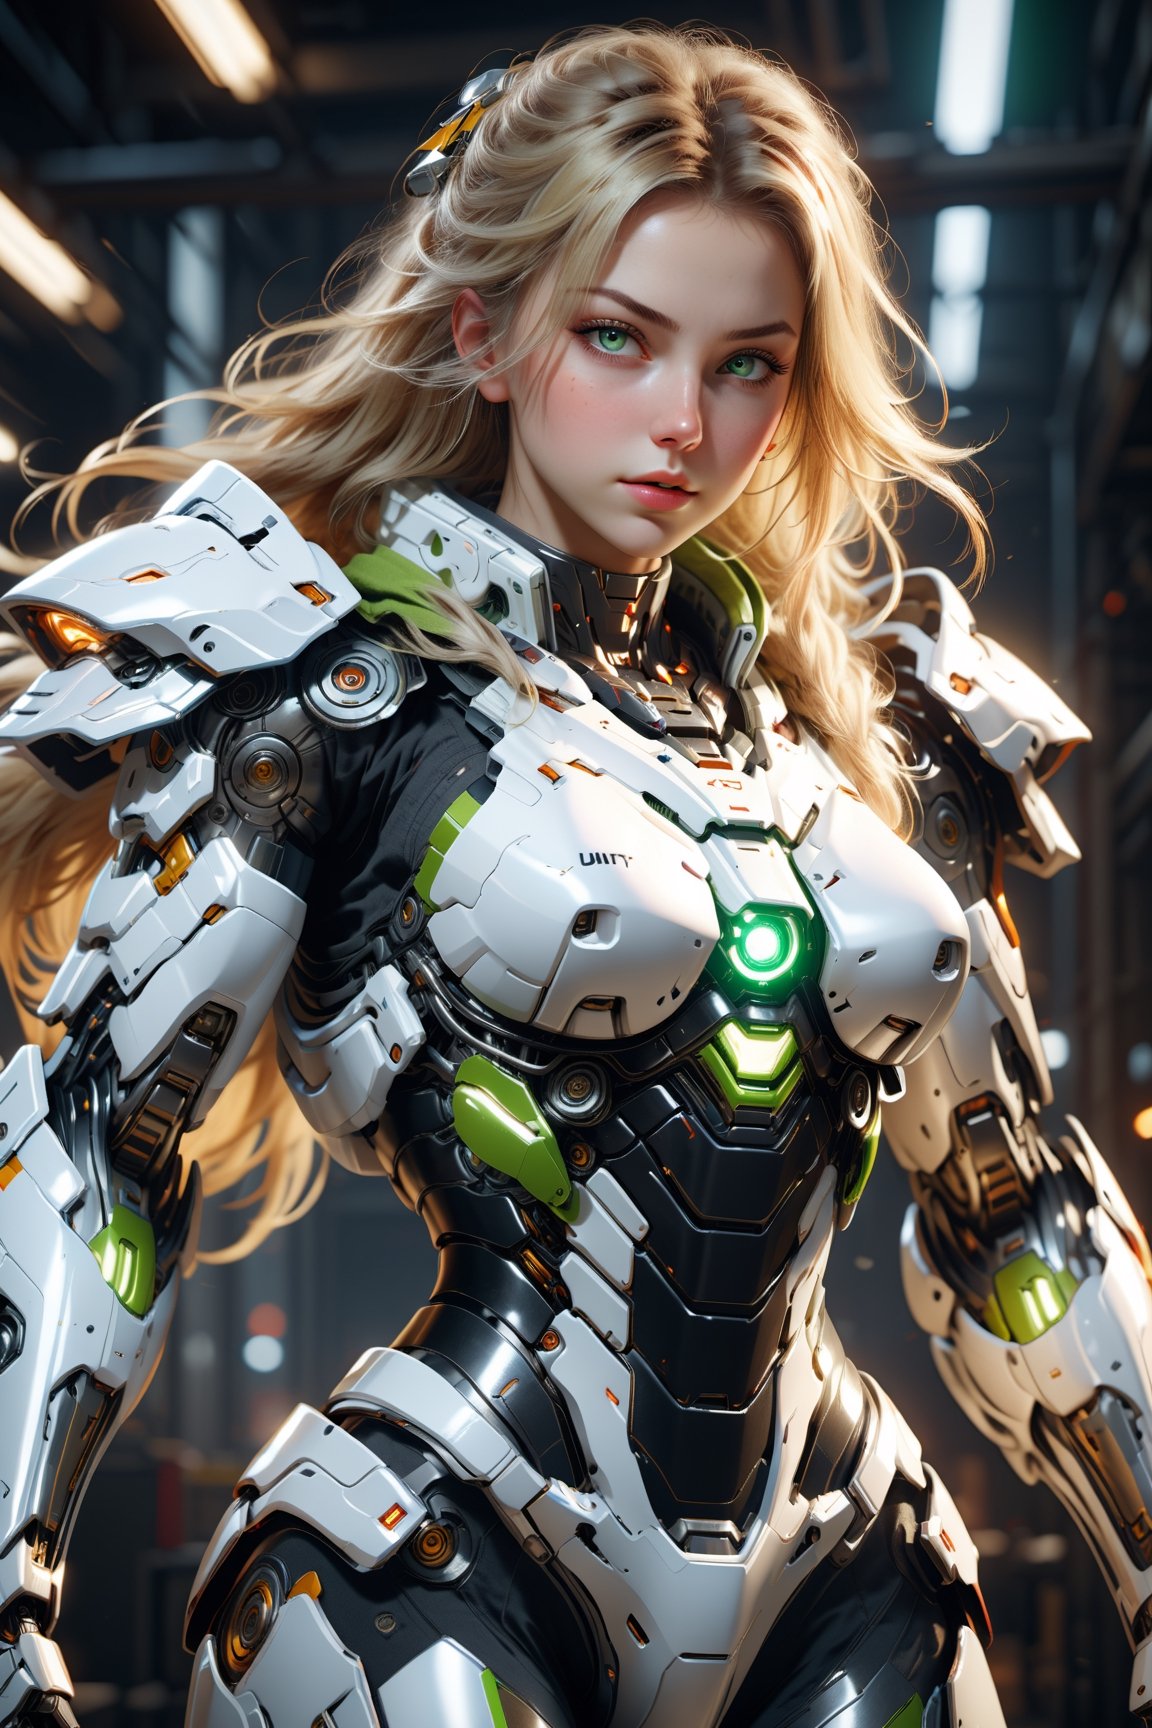 flying girl, (Flying:1.4),(thick body:1.4), (with long blond hair:1.4), Green Eyes, HDR (High Dynamic Range), Ray tracing, NVIDIA RTX, The ultra-Highres, Unreal 5, Subsurface scattering, PBR Texturing, Post-Processing, Anisotropic Filtering, depth of fields, full body shot, Maximum Sharpness and Sharpness, multi-layered texture, Albedo and Specular maps, Surface Shading, Precise simulation of light-material interactions, octan render, Two-tone illumination, low ISO, white balance, rule of thirds, Wide Aperture, 8K Raw, efficient sub-pixel, sub-pixel convolution, (luminescent particles:1.4), {{Masterpiece, Best Quality, super detailed CG, Unity 8k wallpaper, 3d, Cinematic lighting, lens flares}},cyborg style,mecha